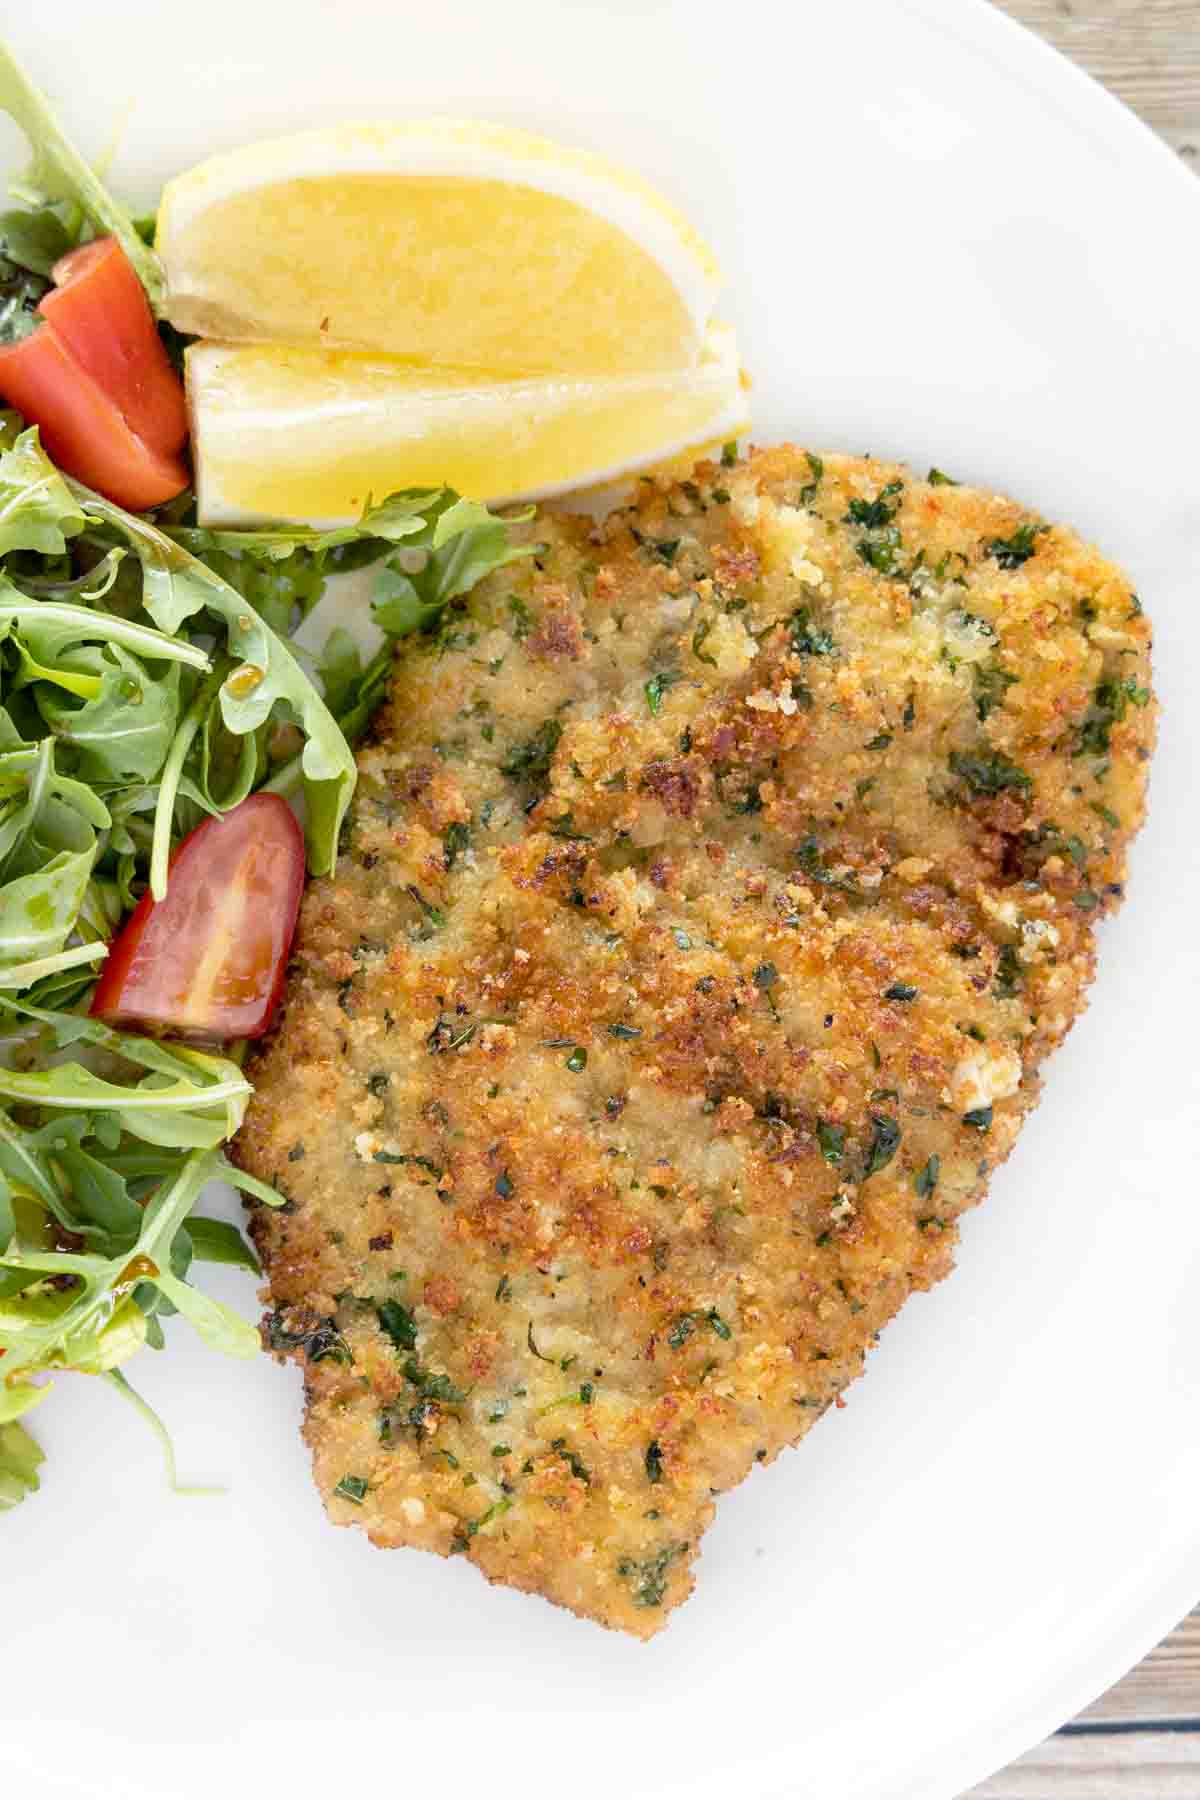 Veal Milanese on white plate with salad and lemon wedges.